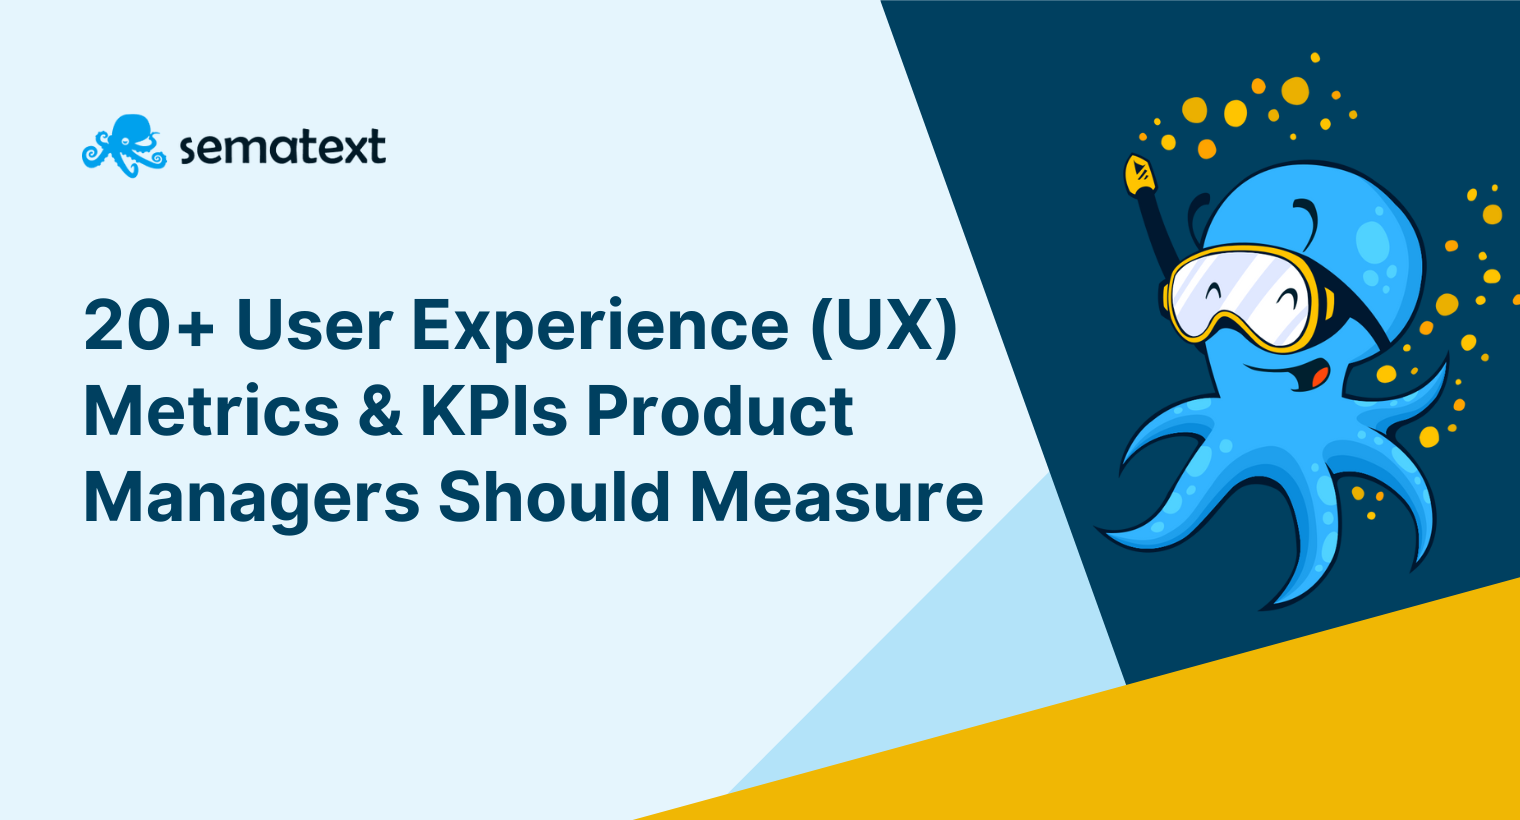 20+ User Experience (UX) Metrics & KPIs to Measure by Product Managers: From Real User Monitoring to Usability, Engagement, Adoption and Retention